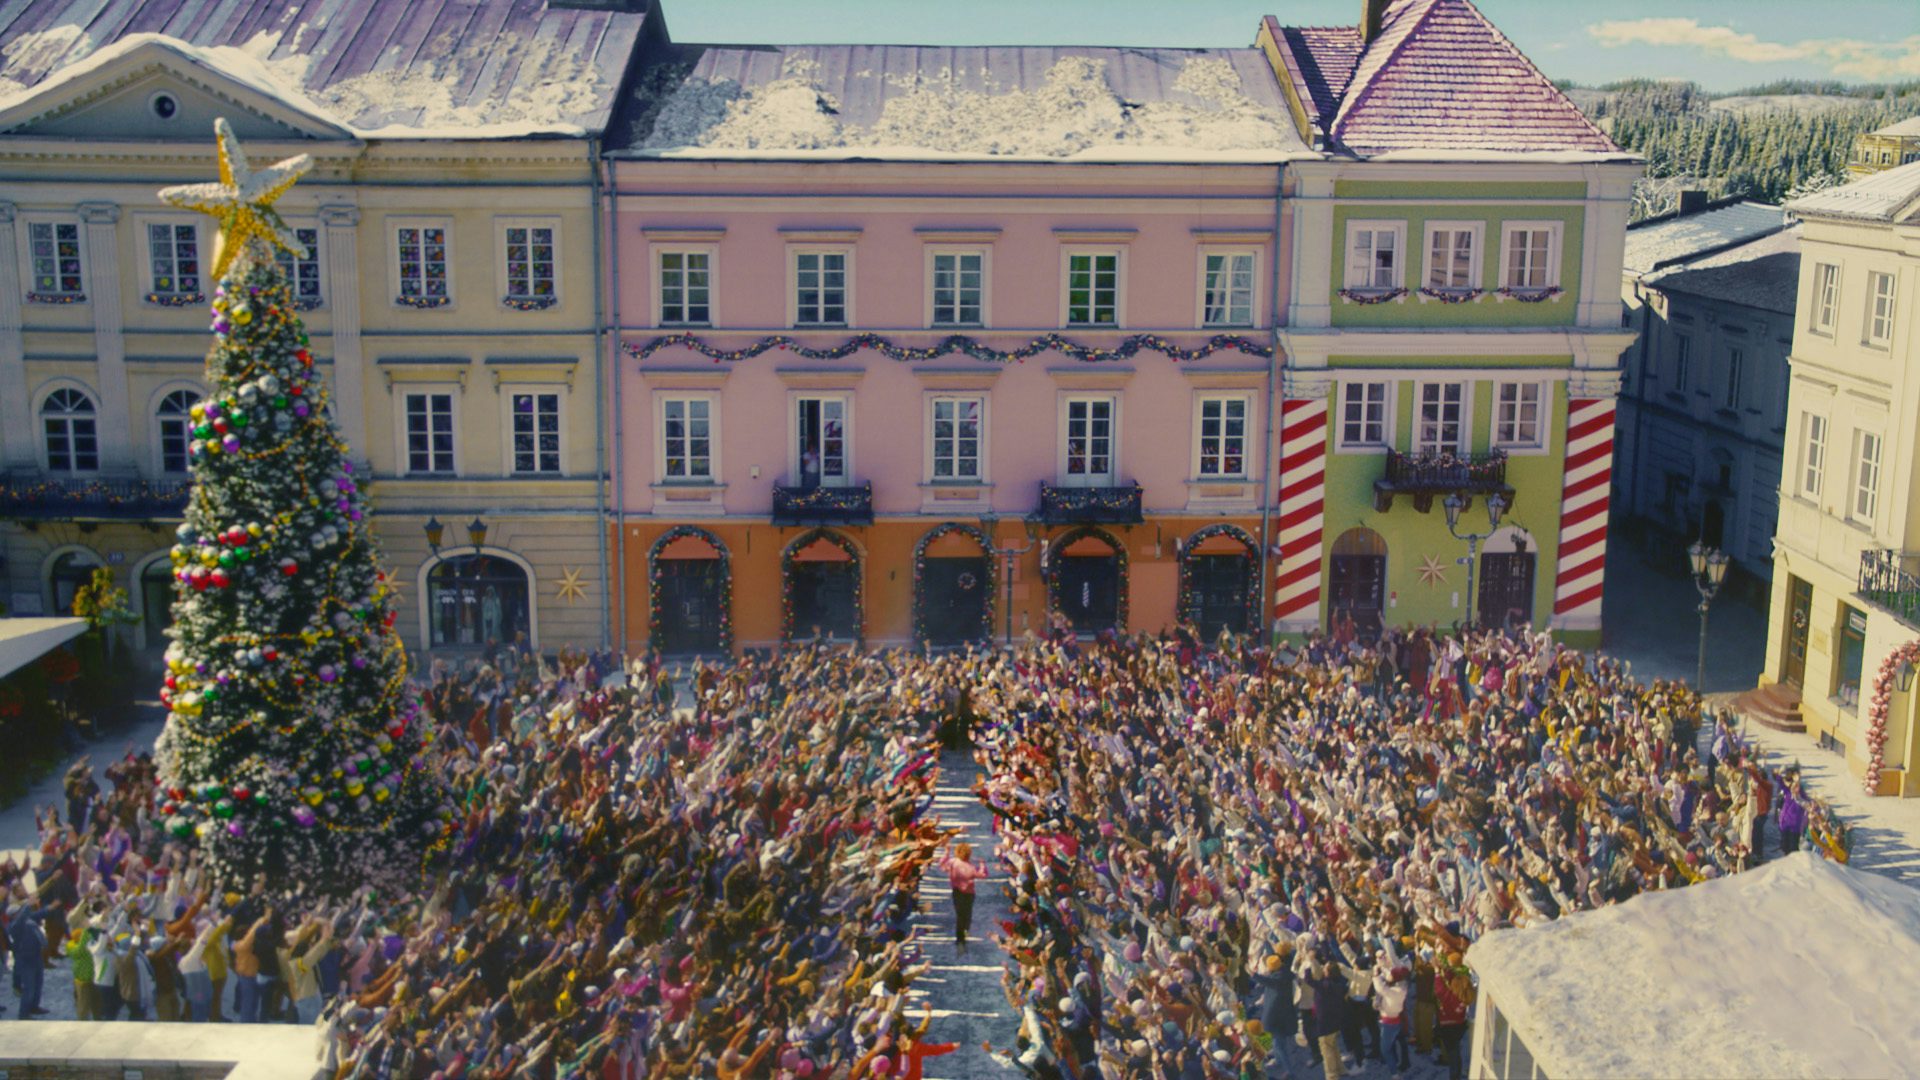 Image shows crowds of people stood in front of a colourful building, in the TK Maxx Christmas 2022 advert